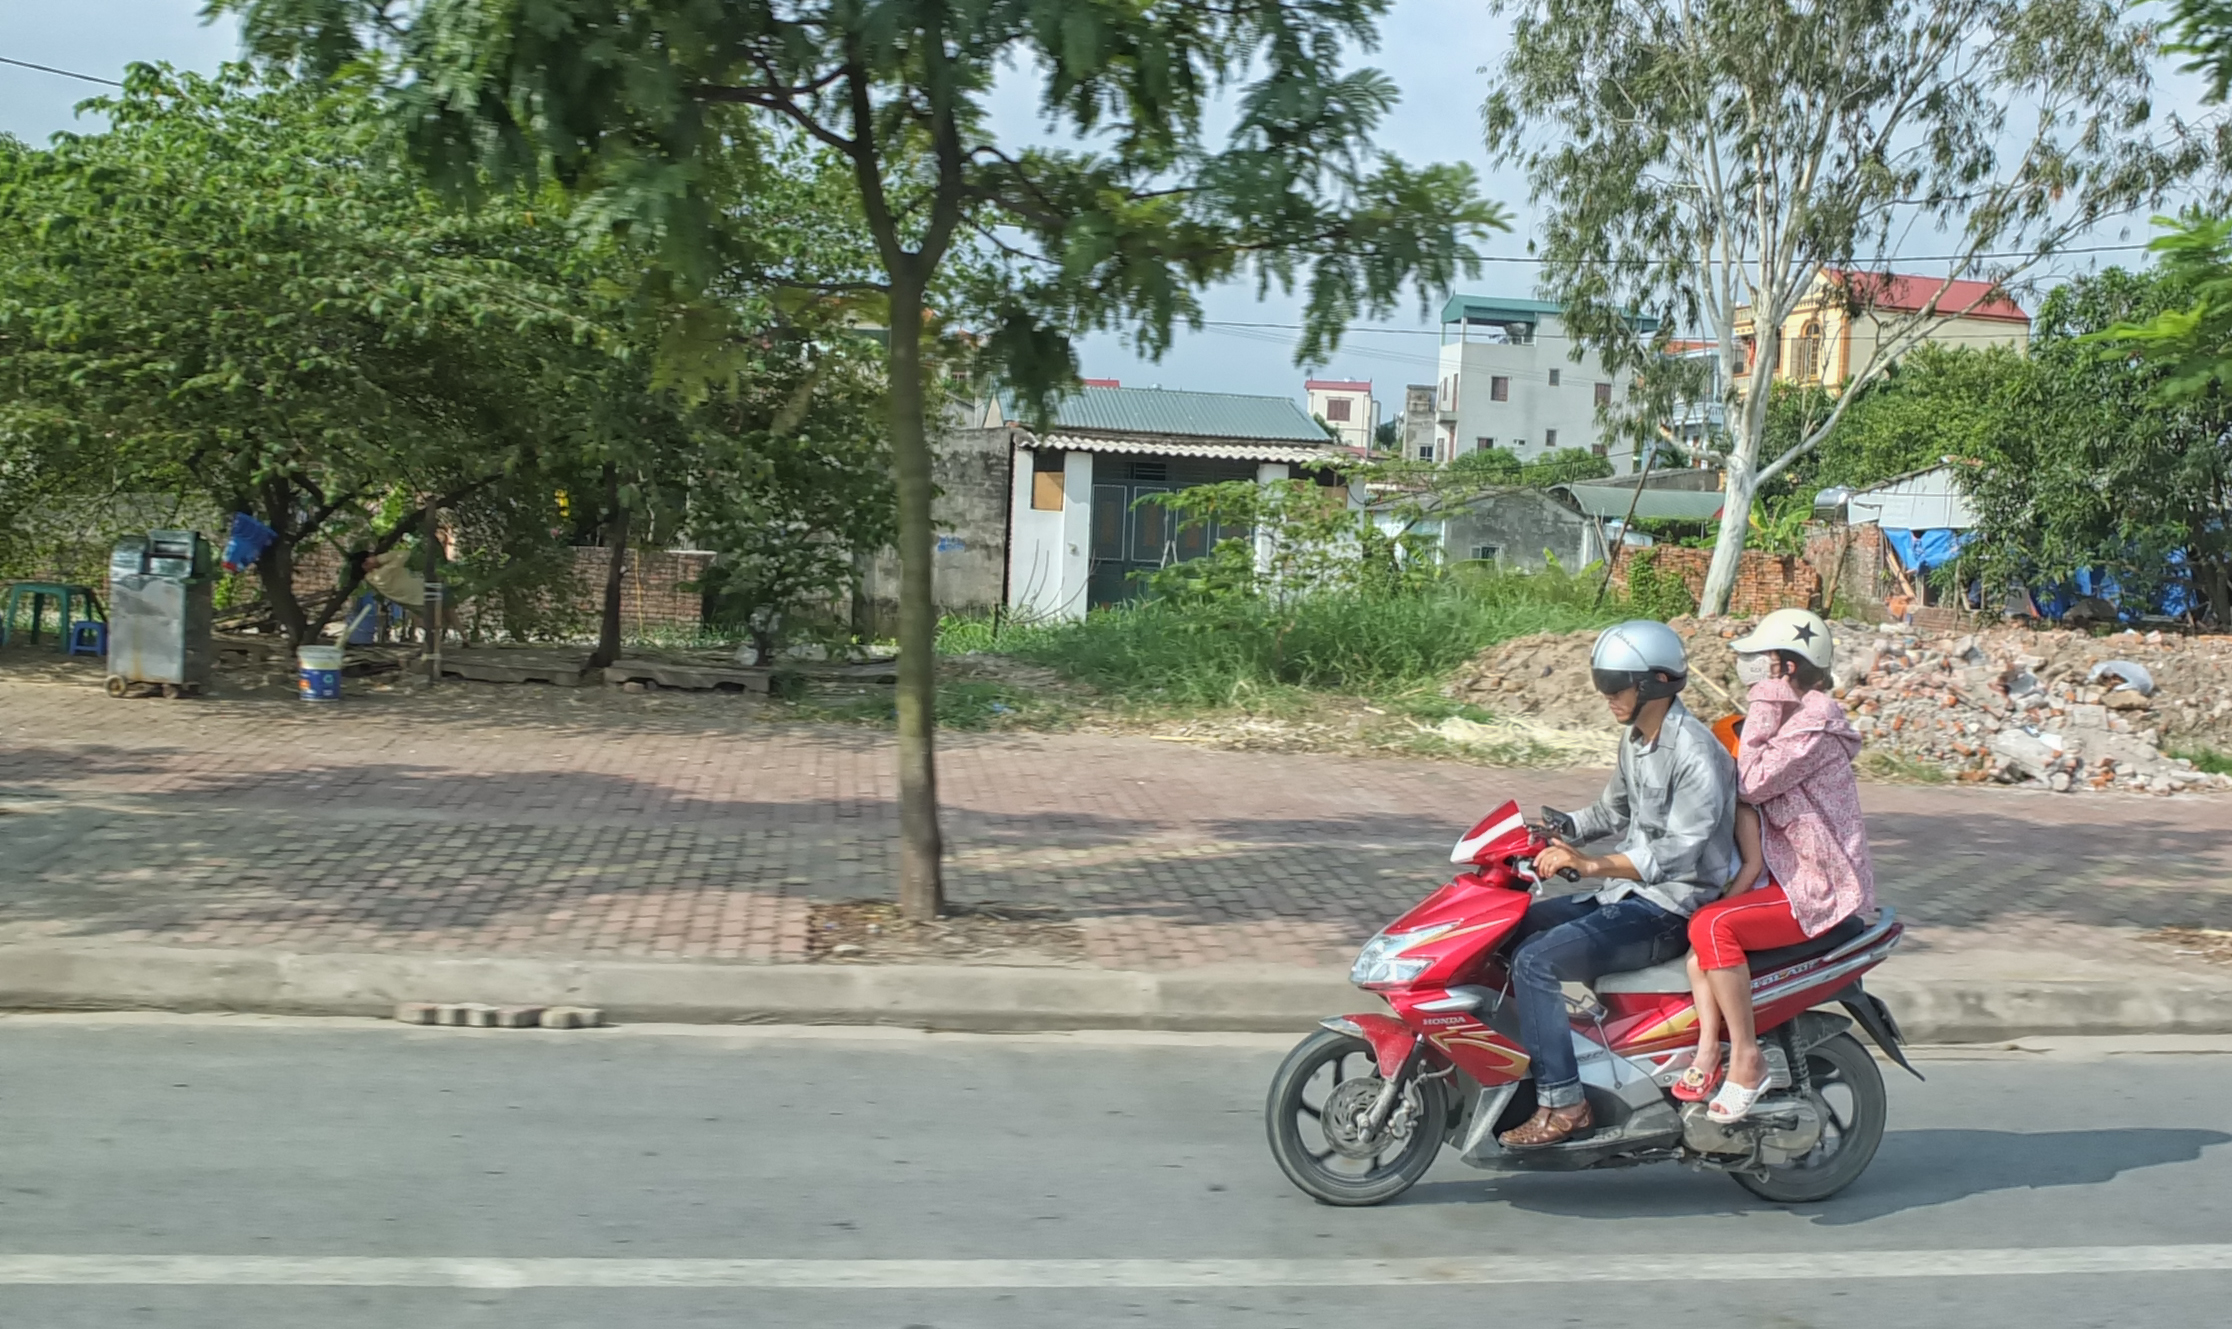 Family on a scooter (notice the kid wedged in between the parents)